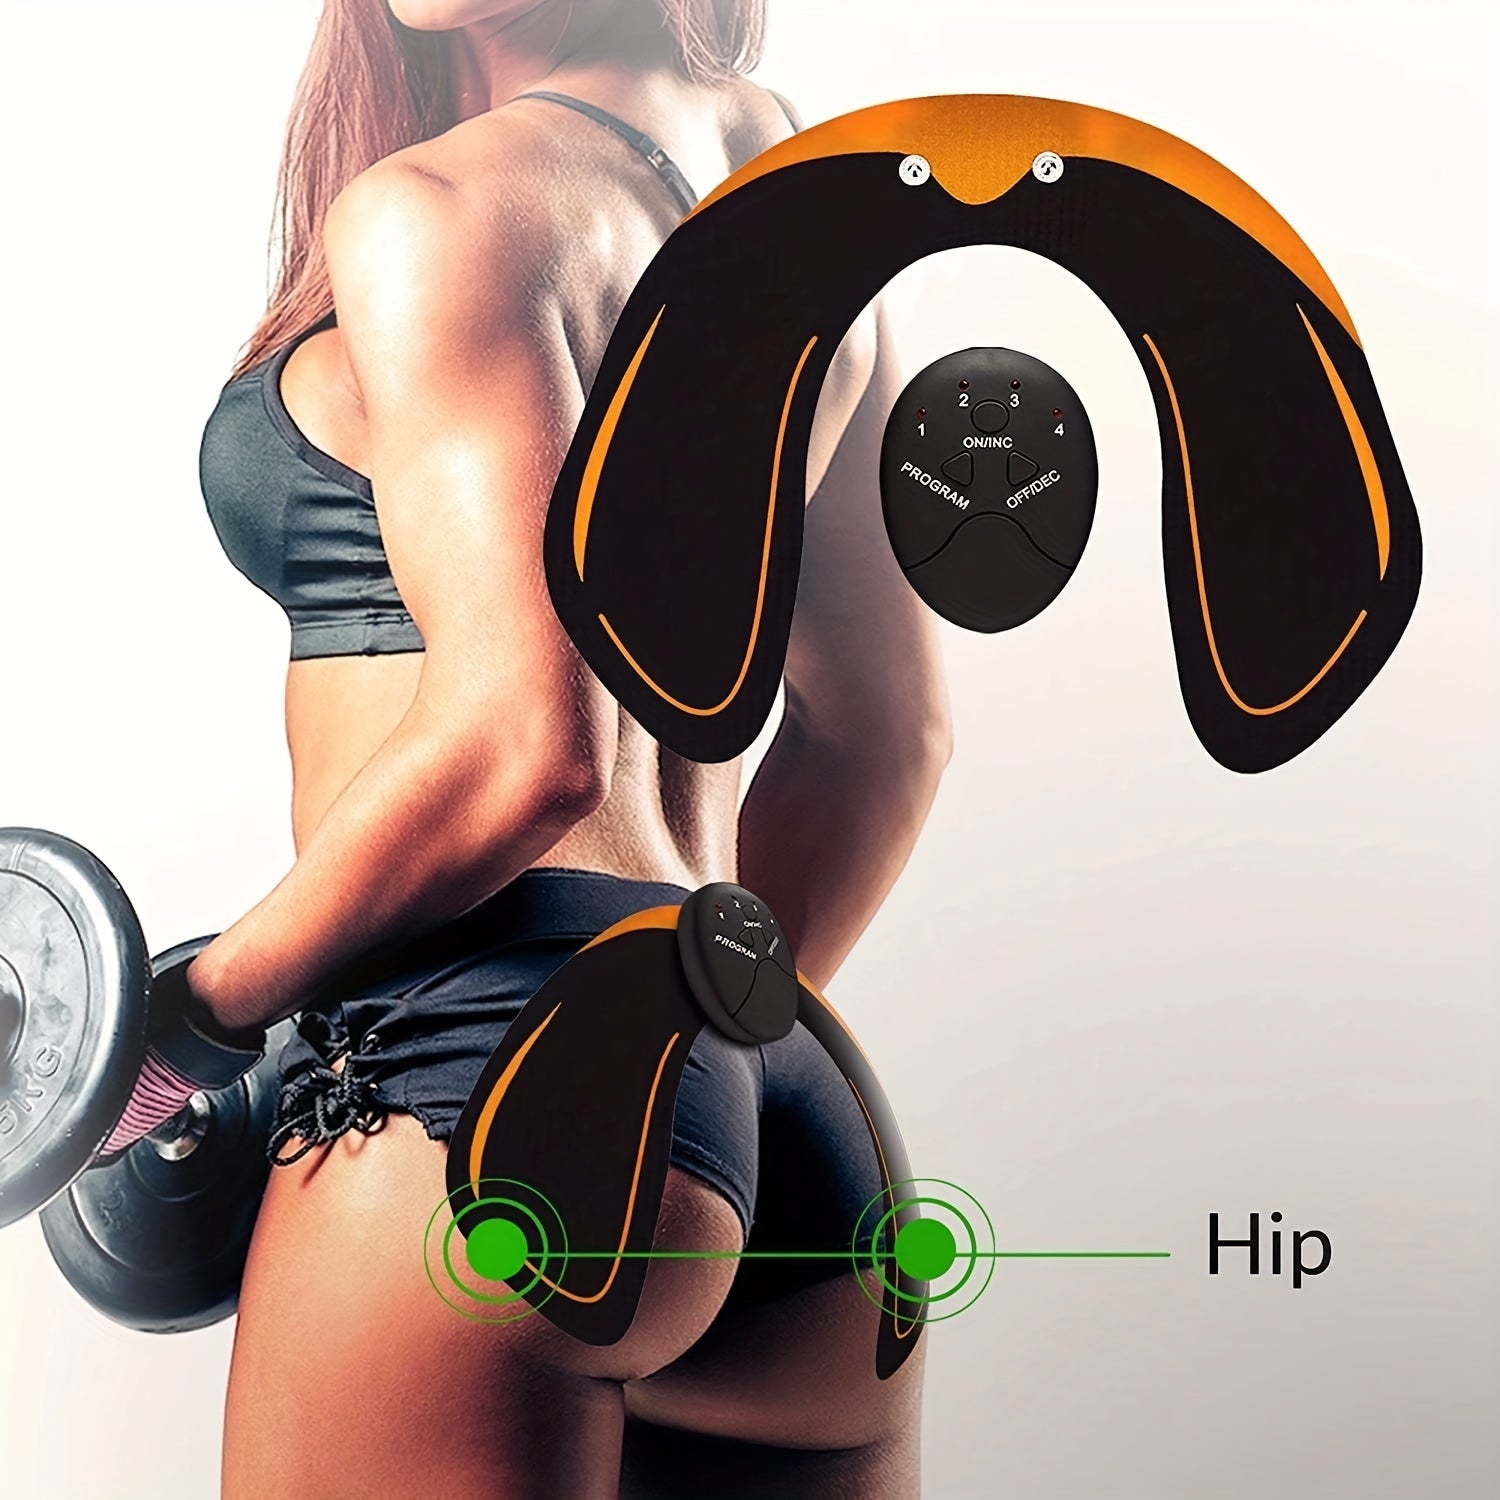 Hip Trainer, Buttock Lift Massage Device Smart Fitness Exercise Gear Home Office, Portable U-Shape Butt Lifting Workout Equipment Gifts For Women - Sidwish